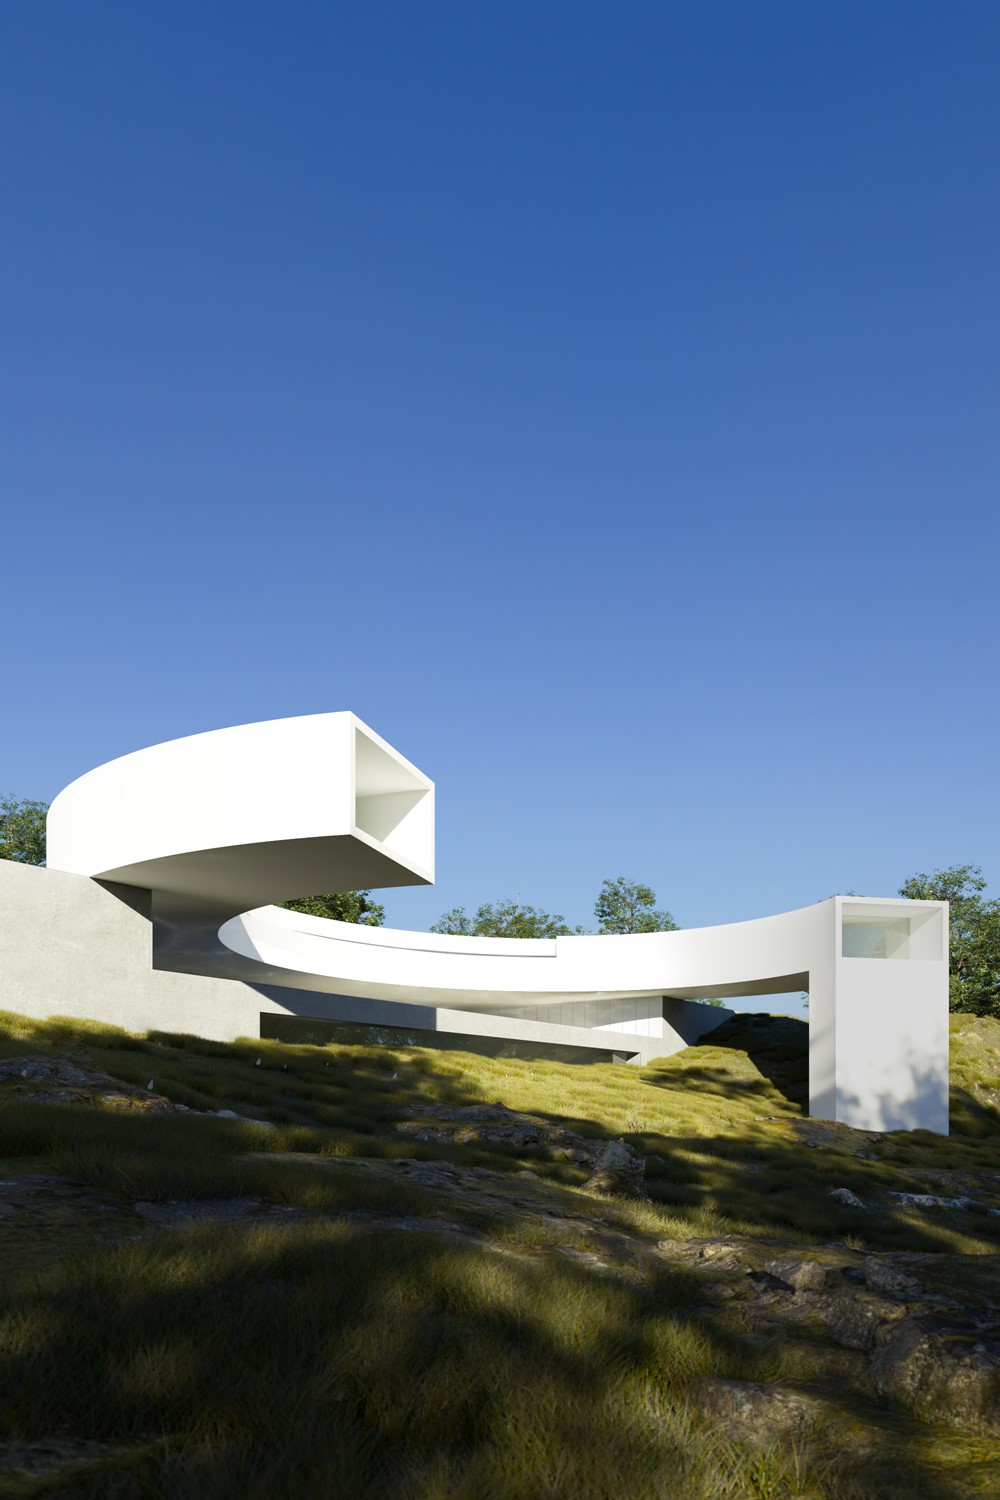 House of the sun by Fran Silvestre Arquitectos